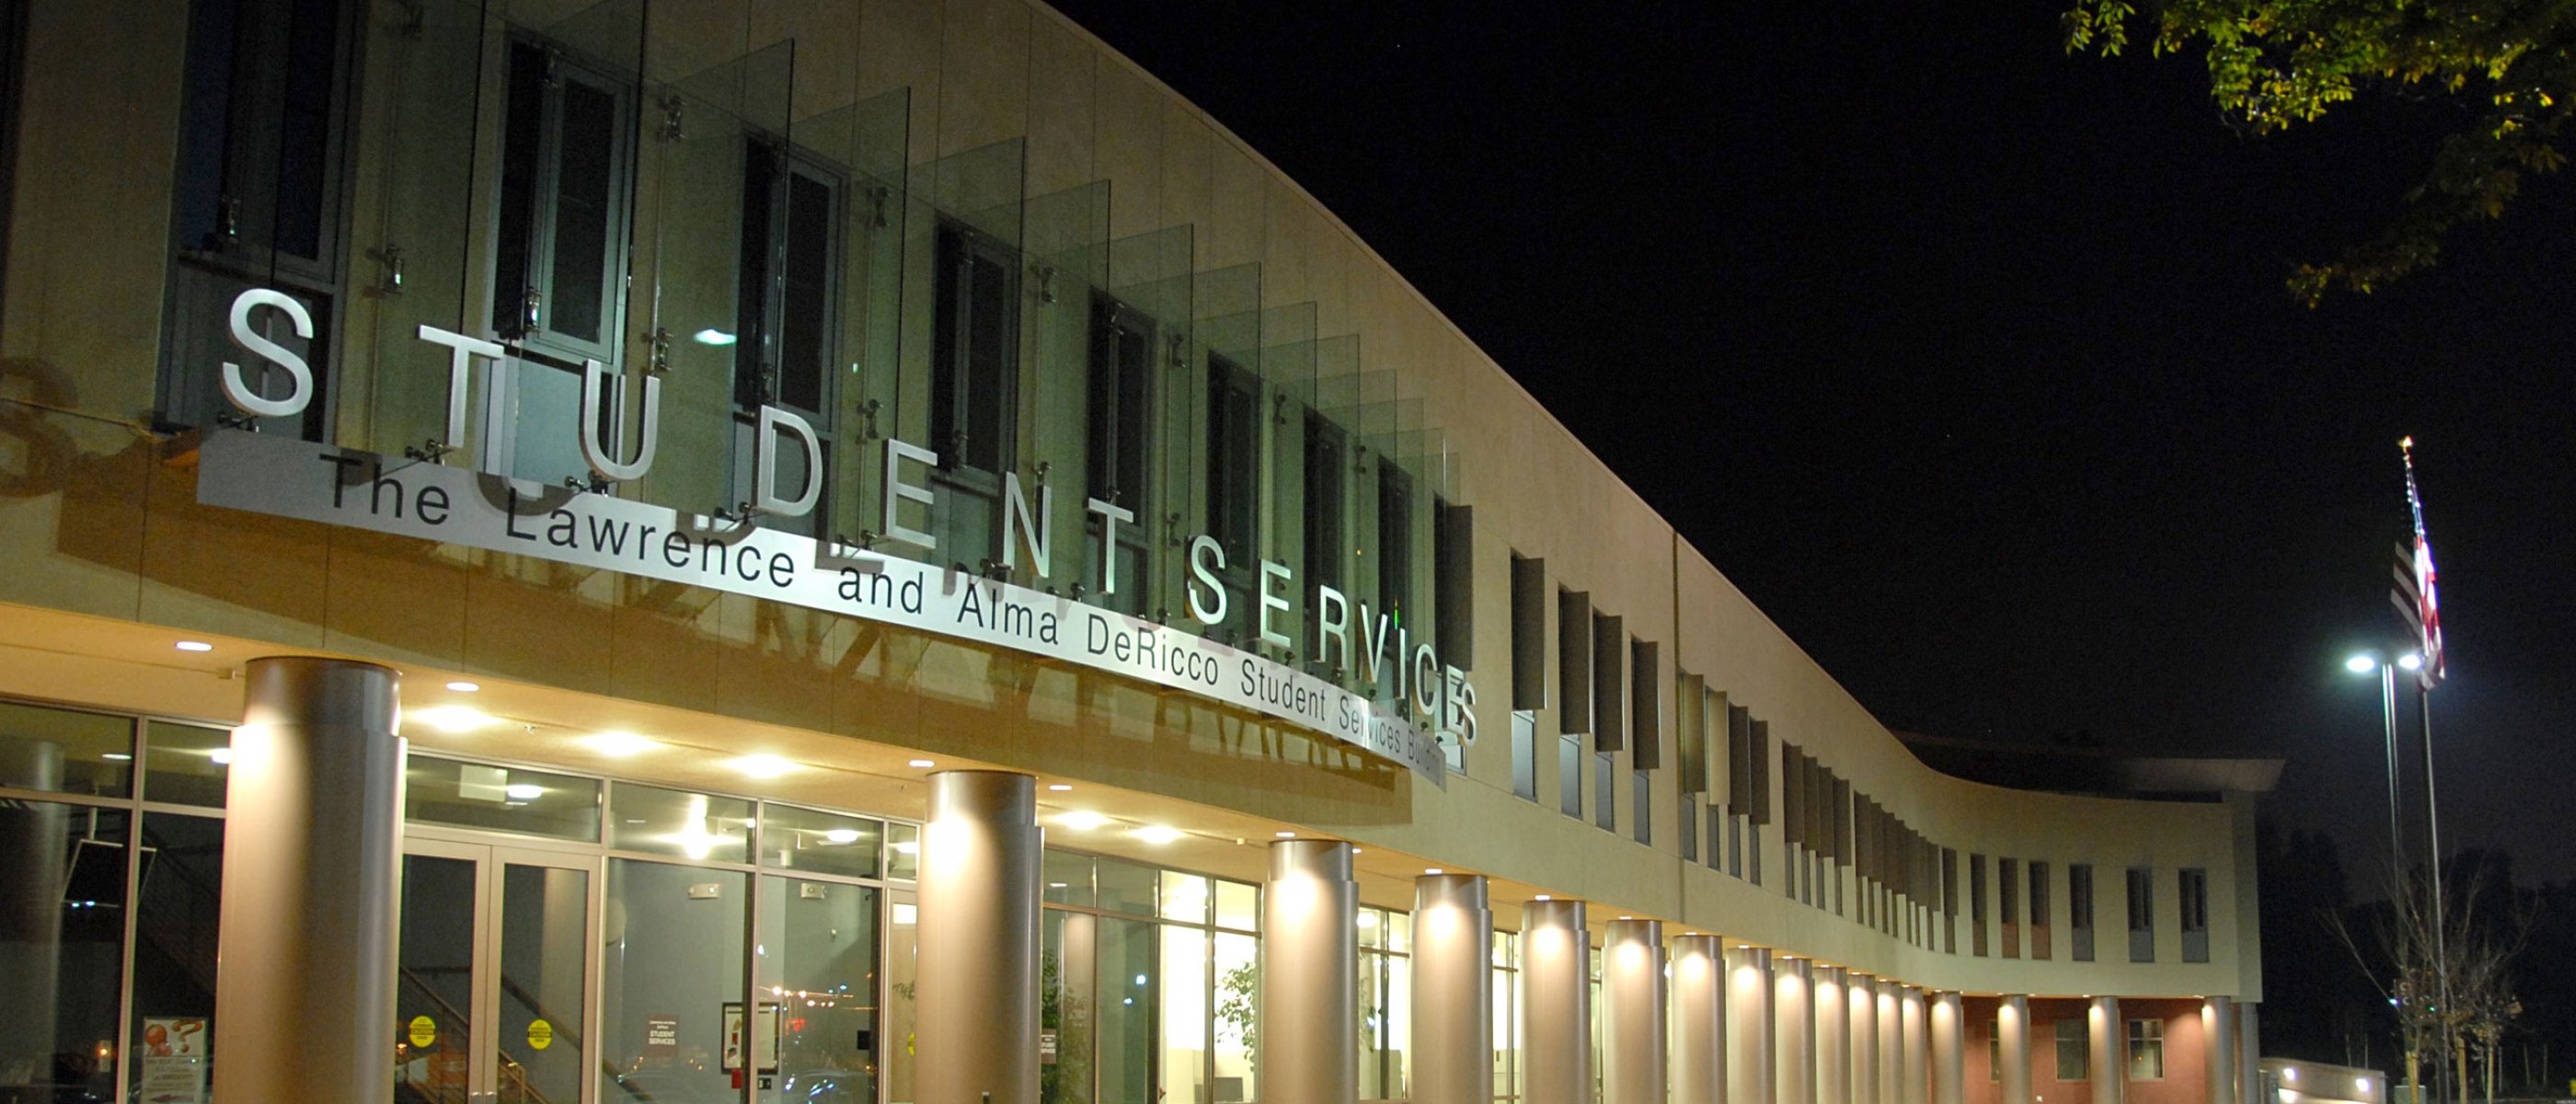 Dericco student services at night